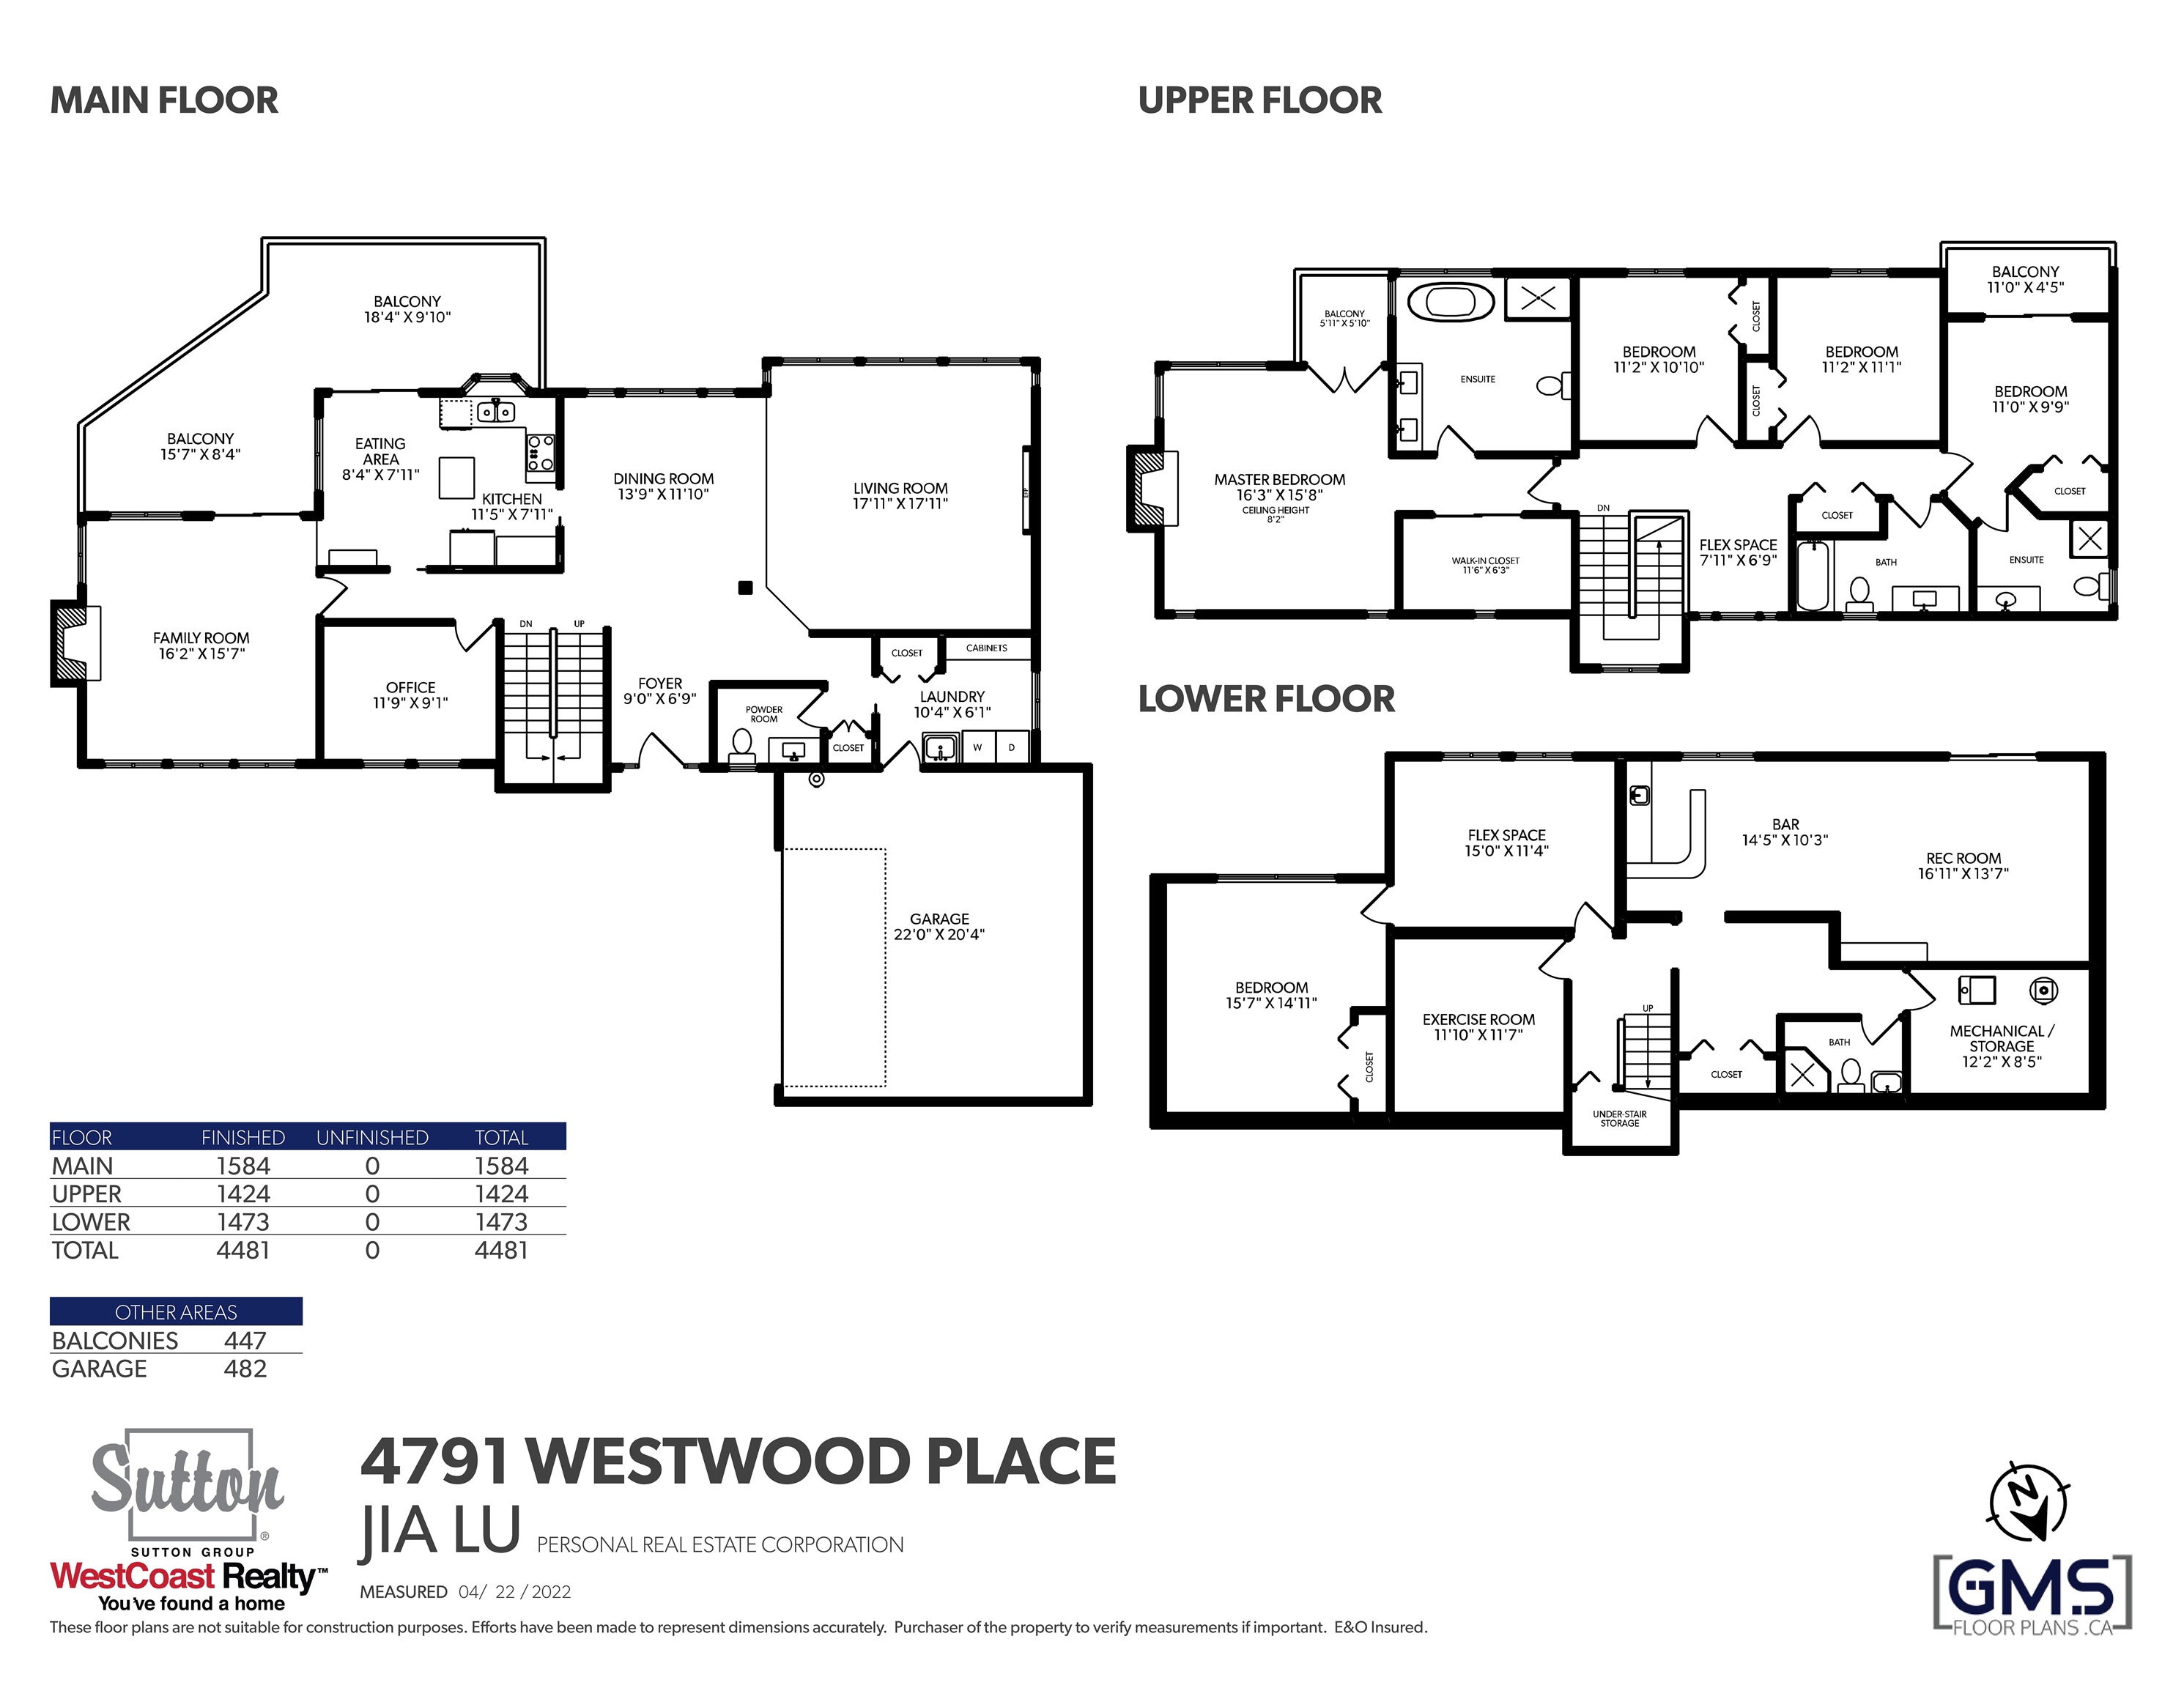 Listing image of 4791 WESTWOOD PLACE